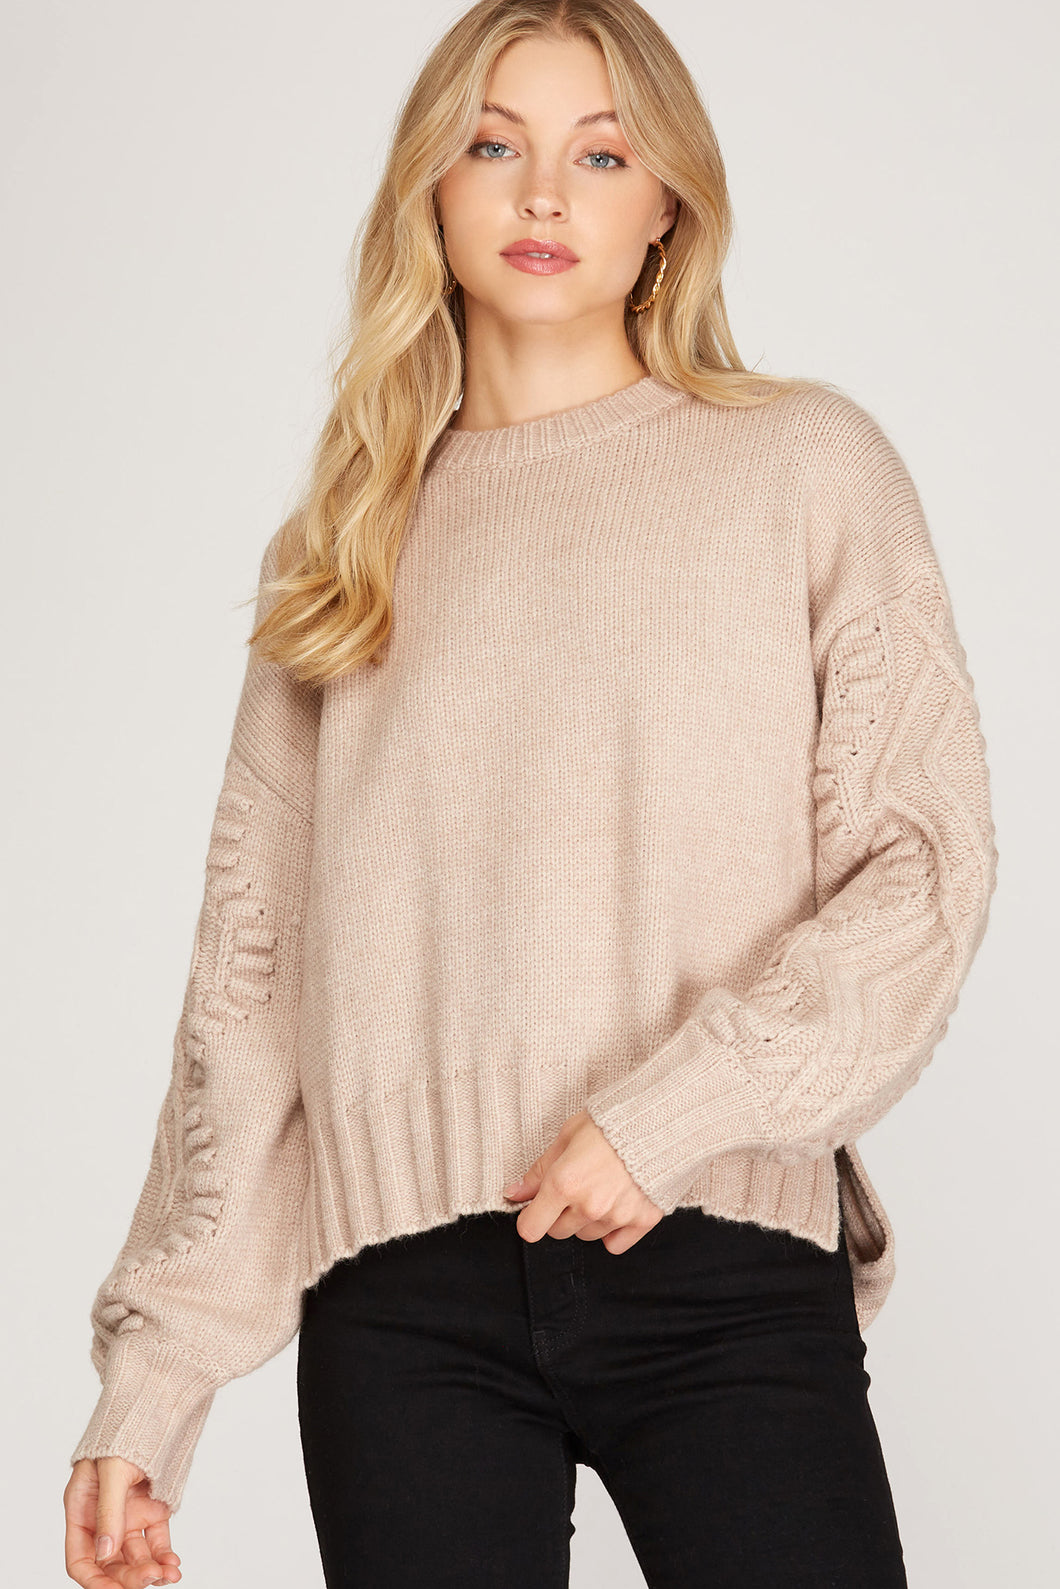 LONG SLEEVE KNIT SWEATER TOP